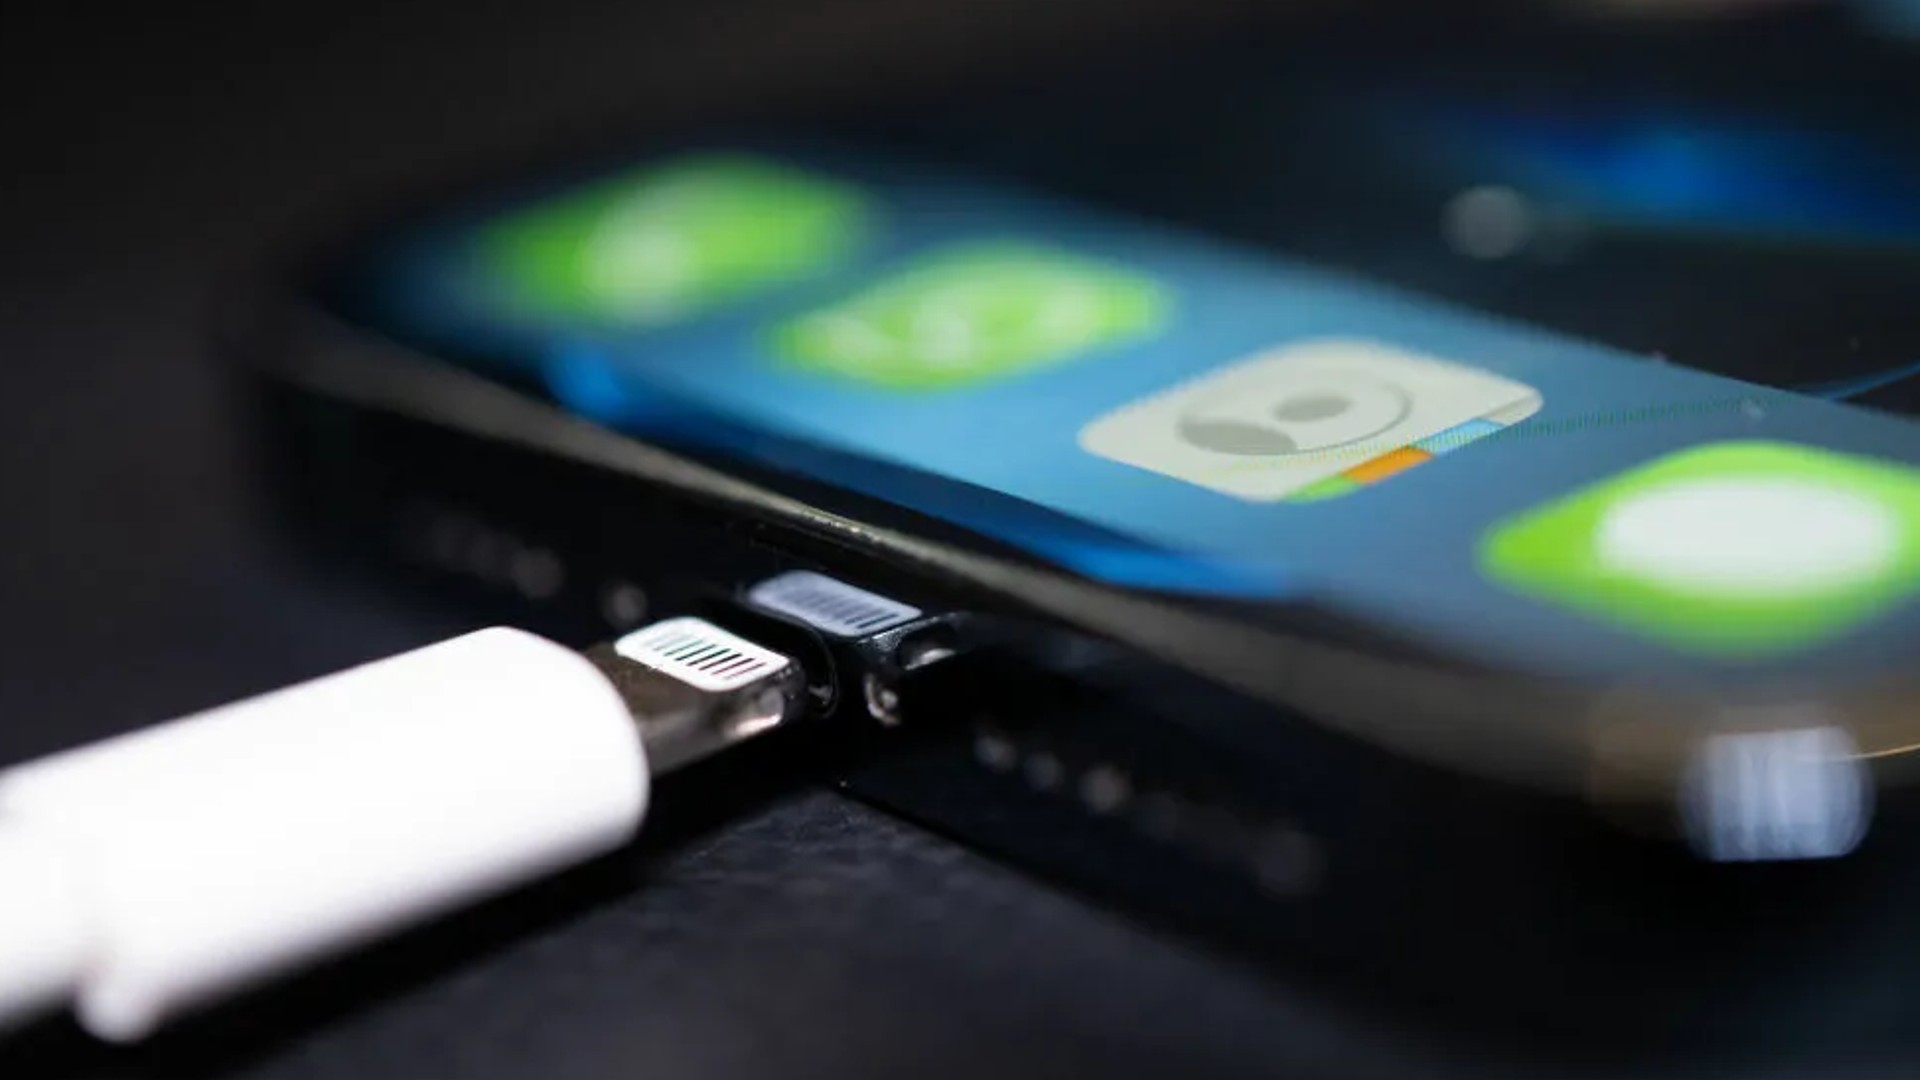 The European Union Wants Every Phone To Have The Same Type Of Charging Port, Including Apple.